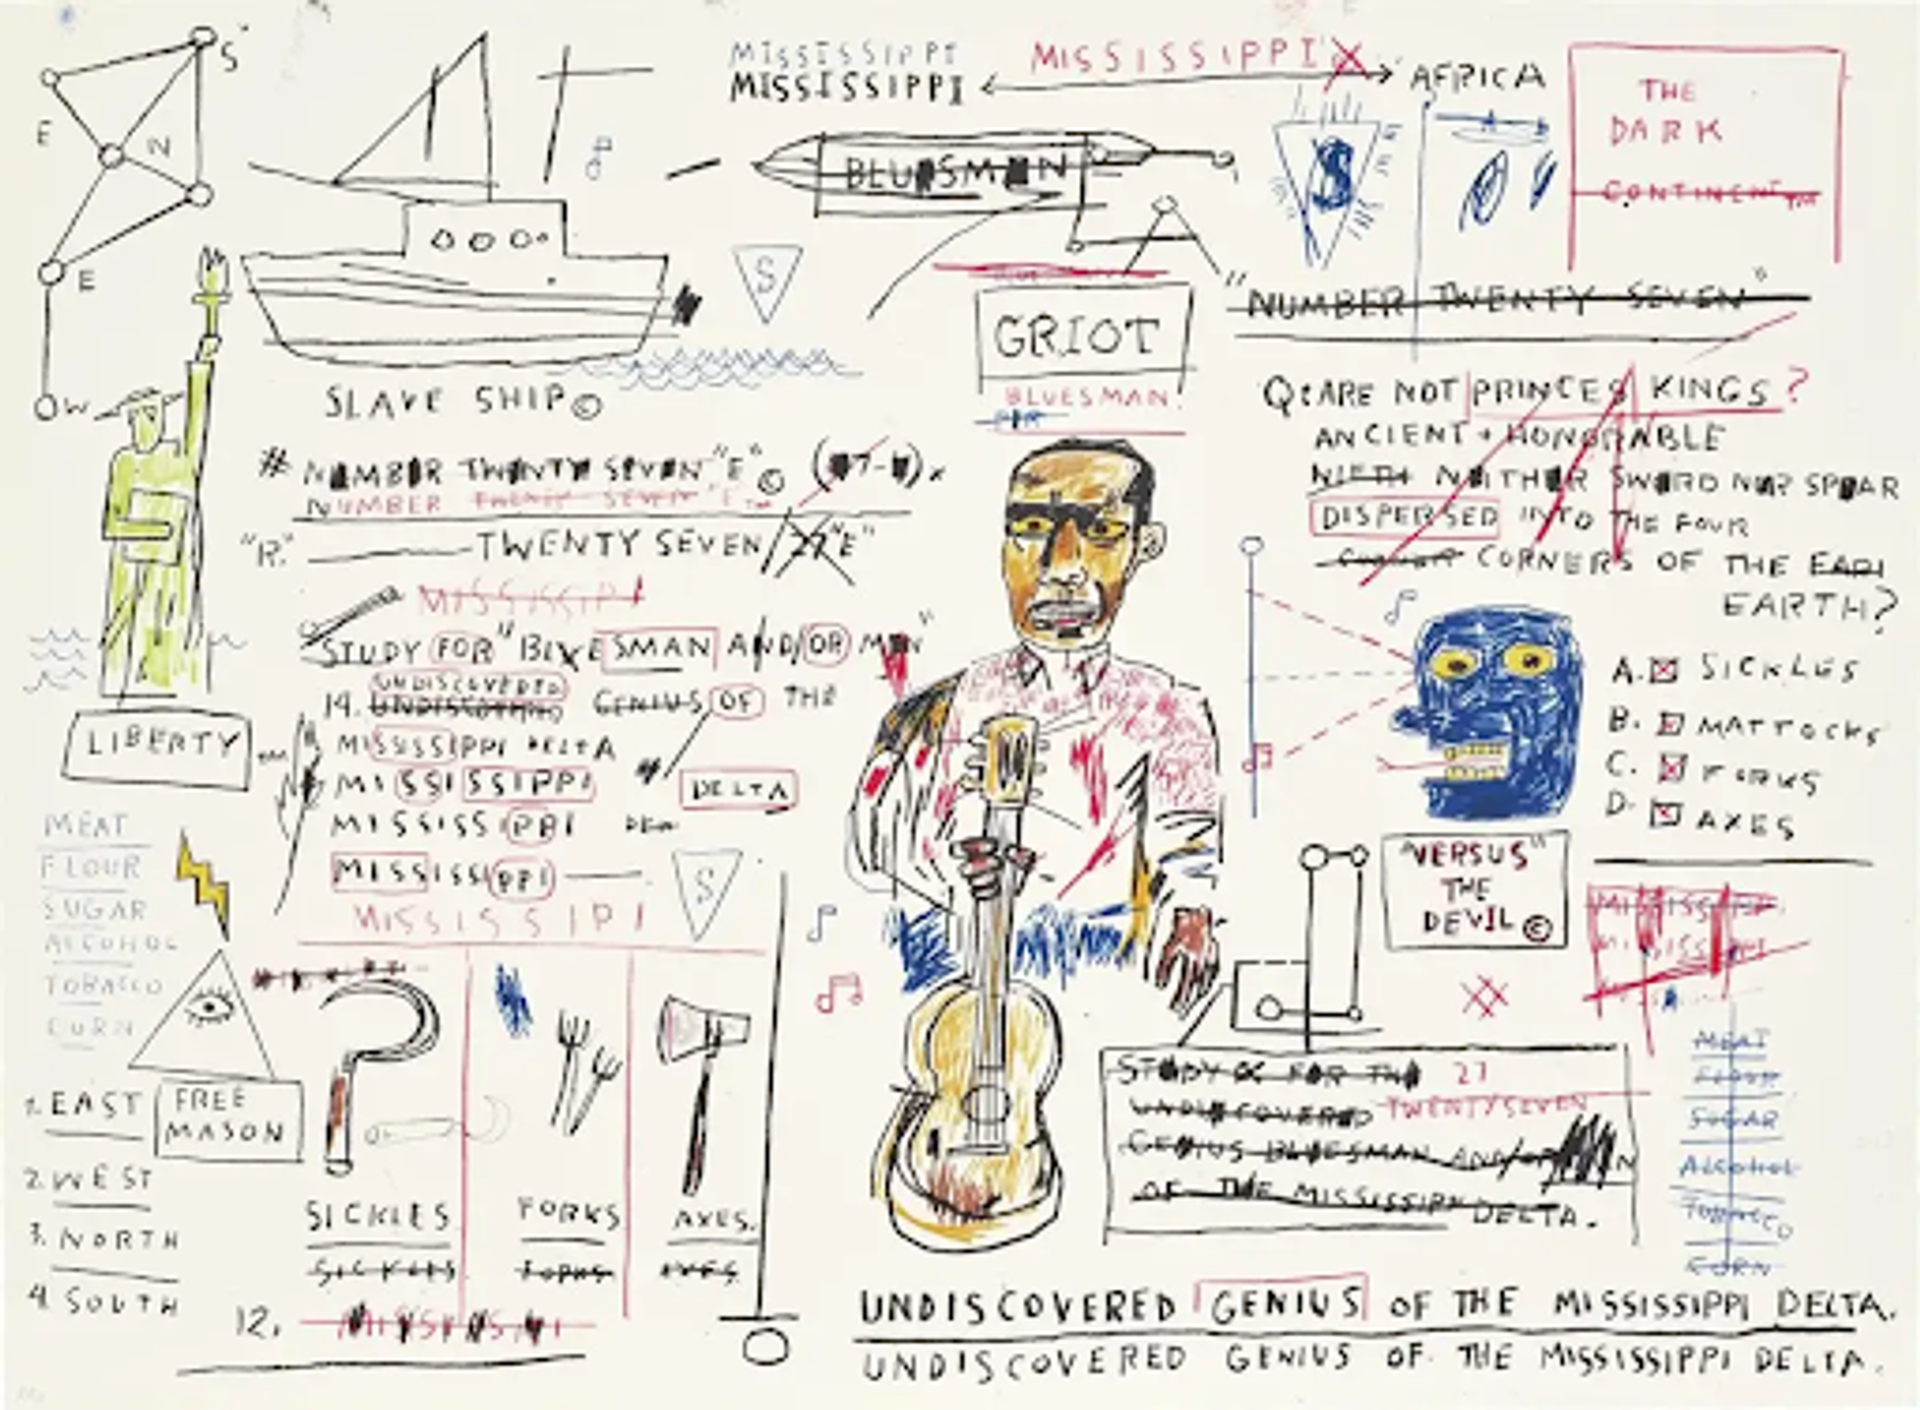 Jean-Michel Basquiat’s Undiscovered Genius. A Neo Expressionist screenprint of a man holding a guitar in the centre of a white background surrounded by texts and an assortment of images. 